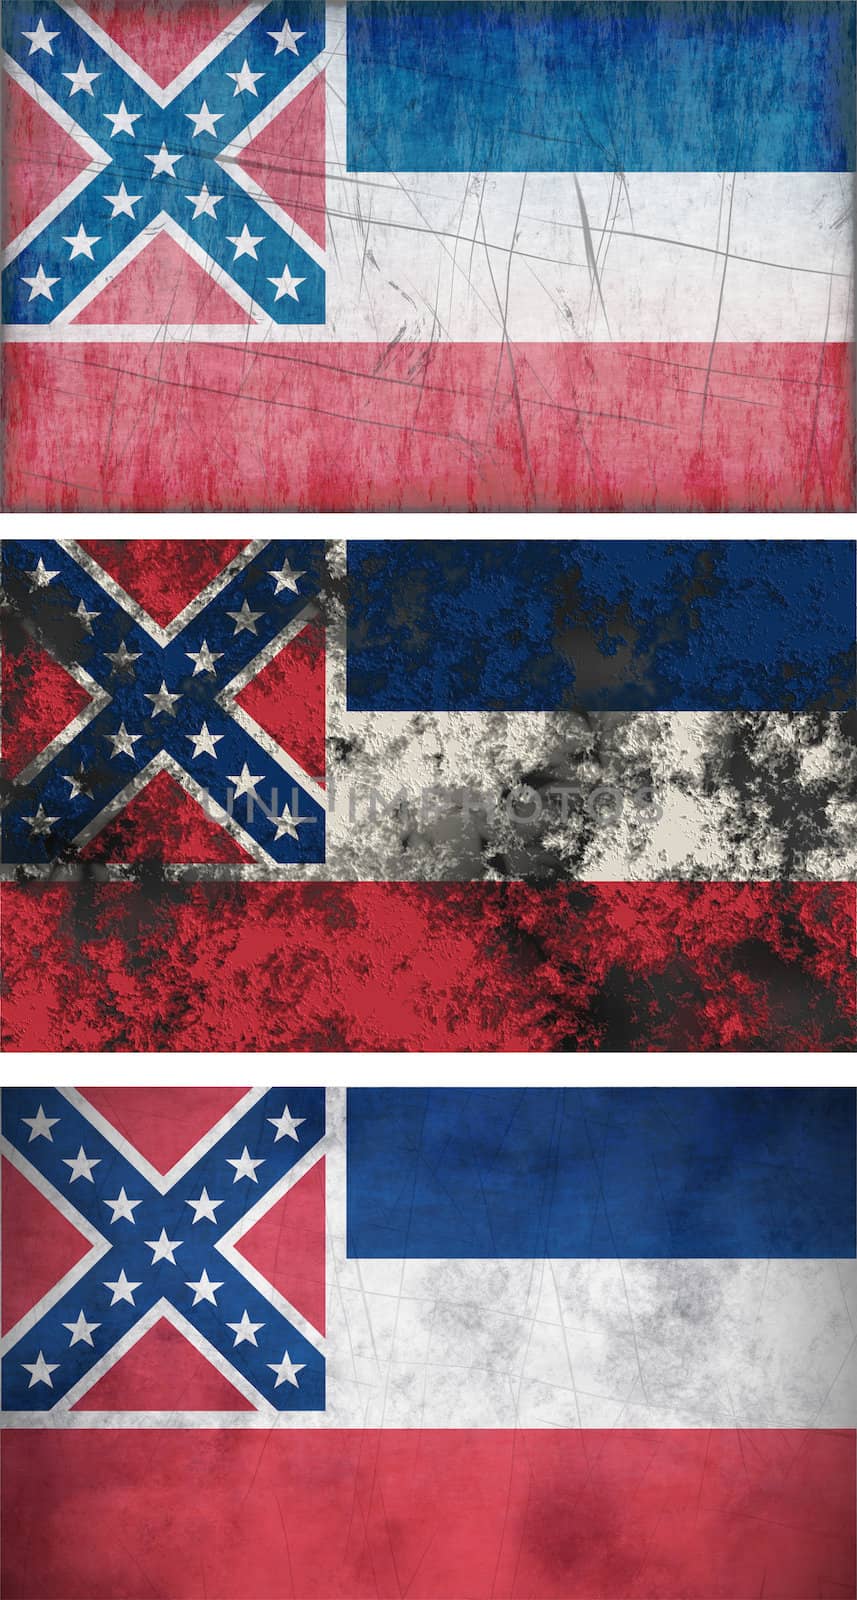 Great Image of the Flag of Mississippi